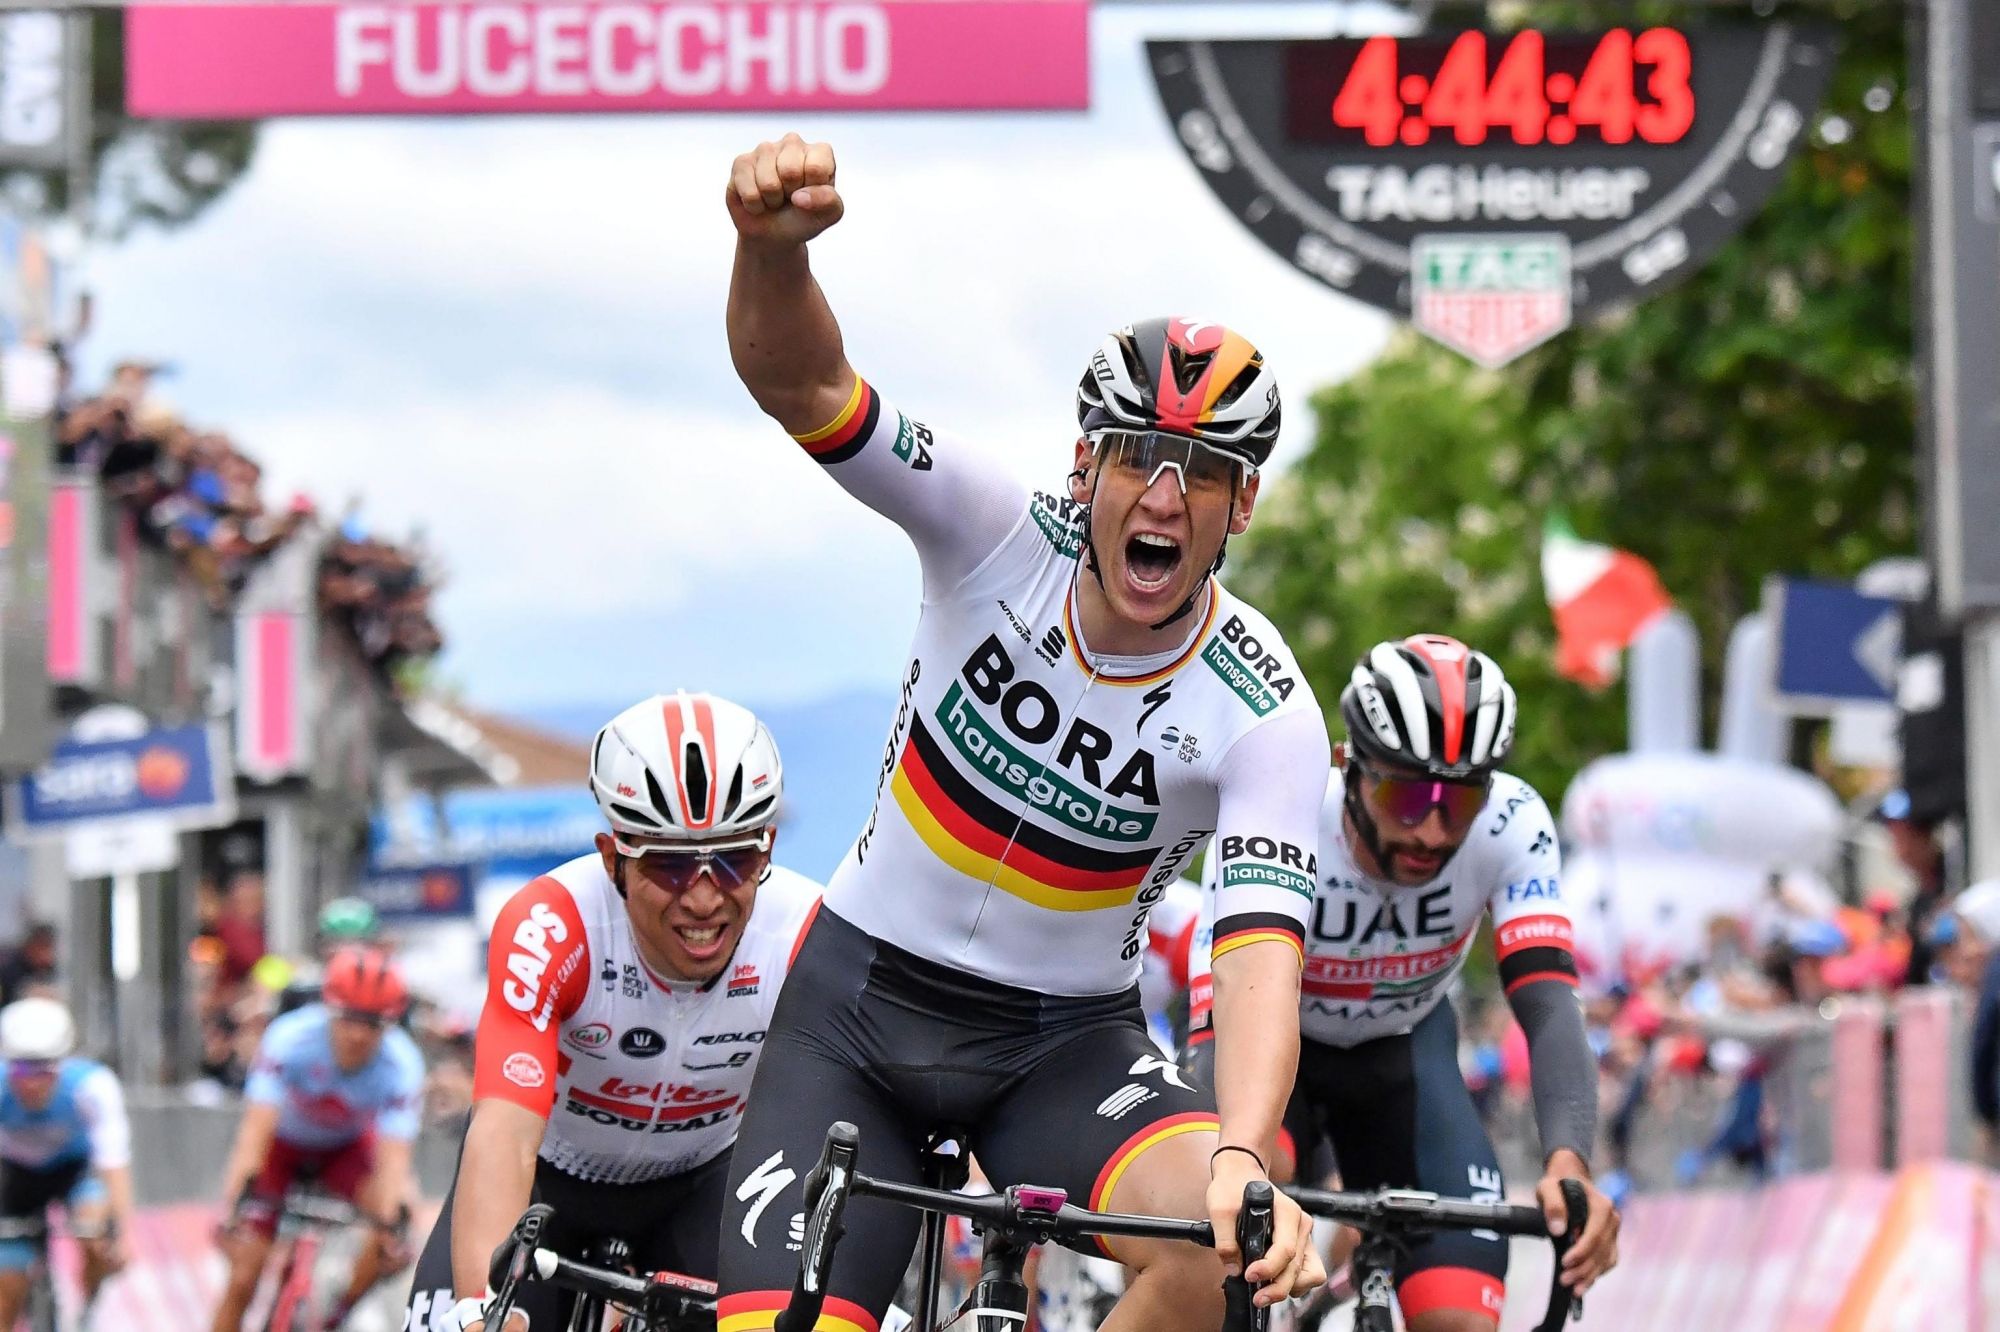 epa07564825 German cyclist Pascal Ackermann (C) of Bora-hansgrohe team celebrates winning the second stage of the Giro d'Italia cycling race, over 205km between Bologna and Fucecchio, Italy, 12 May 2019.  EPA/ALESSANDRO DI MEO ITALY CYCLING GIRO D'ITALIA